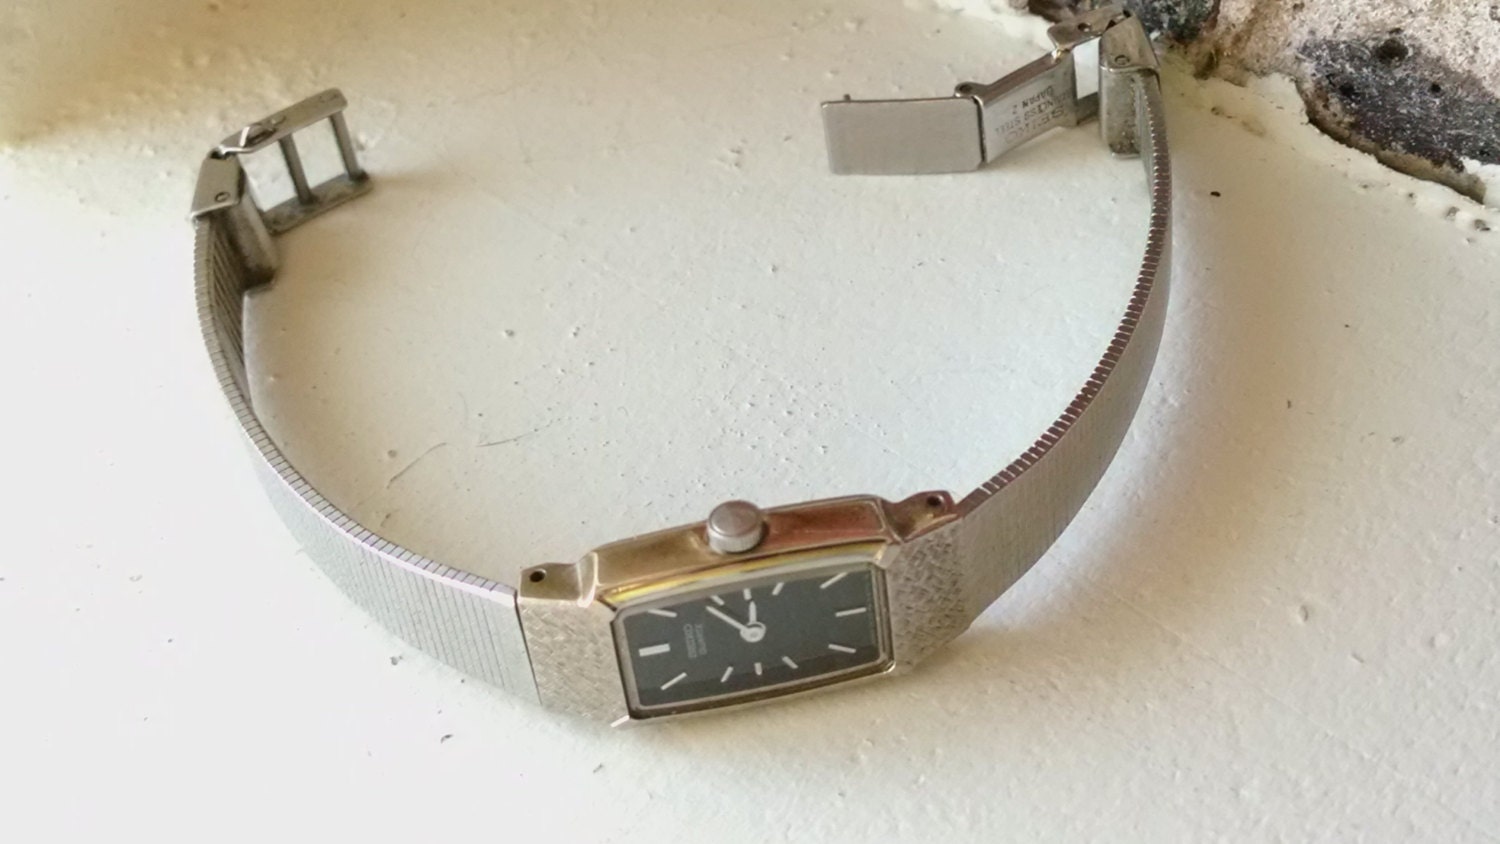 Vintage ladies Seiko Black Square Face watch with hammered